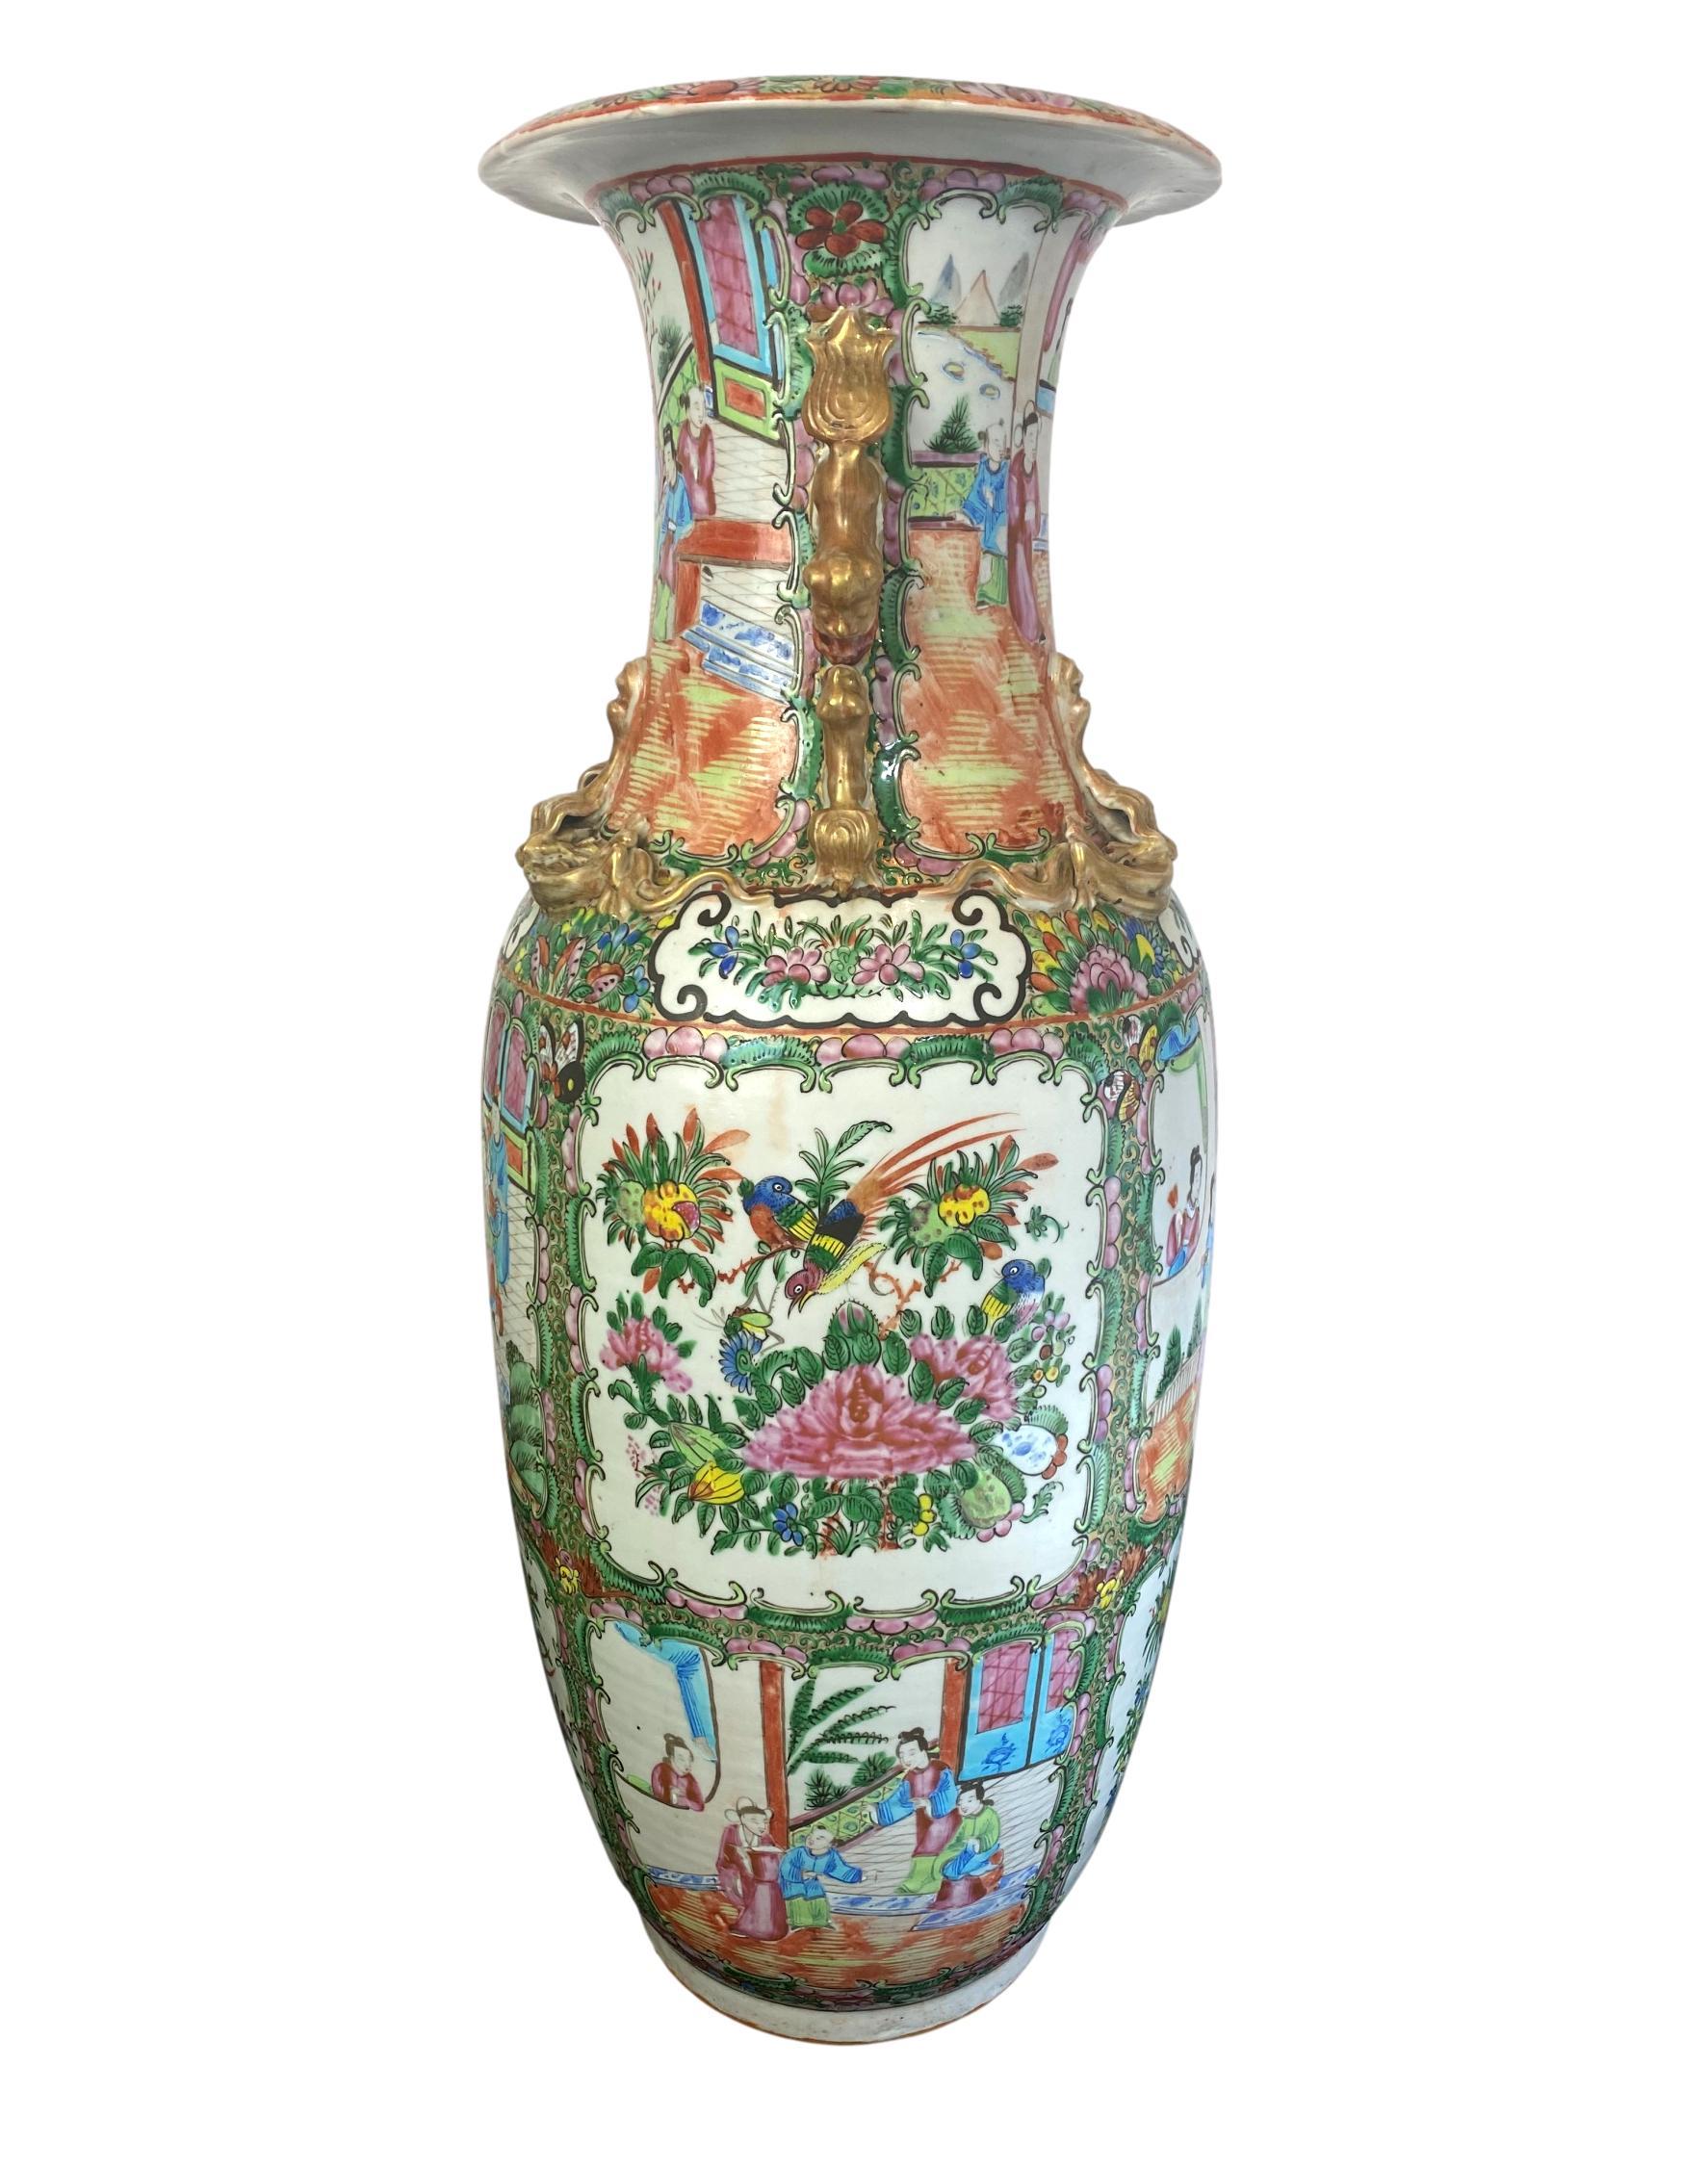 Chinese export porcelain rose medallion vase, 23in, Canton, circa 1900.